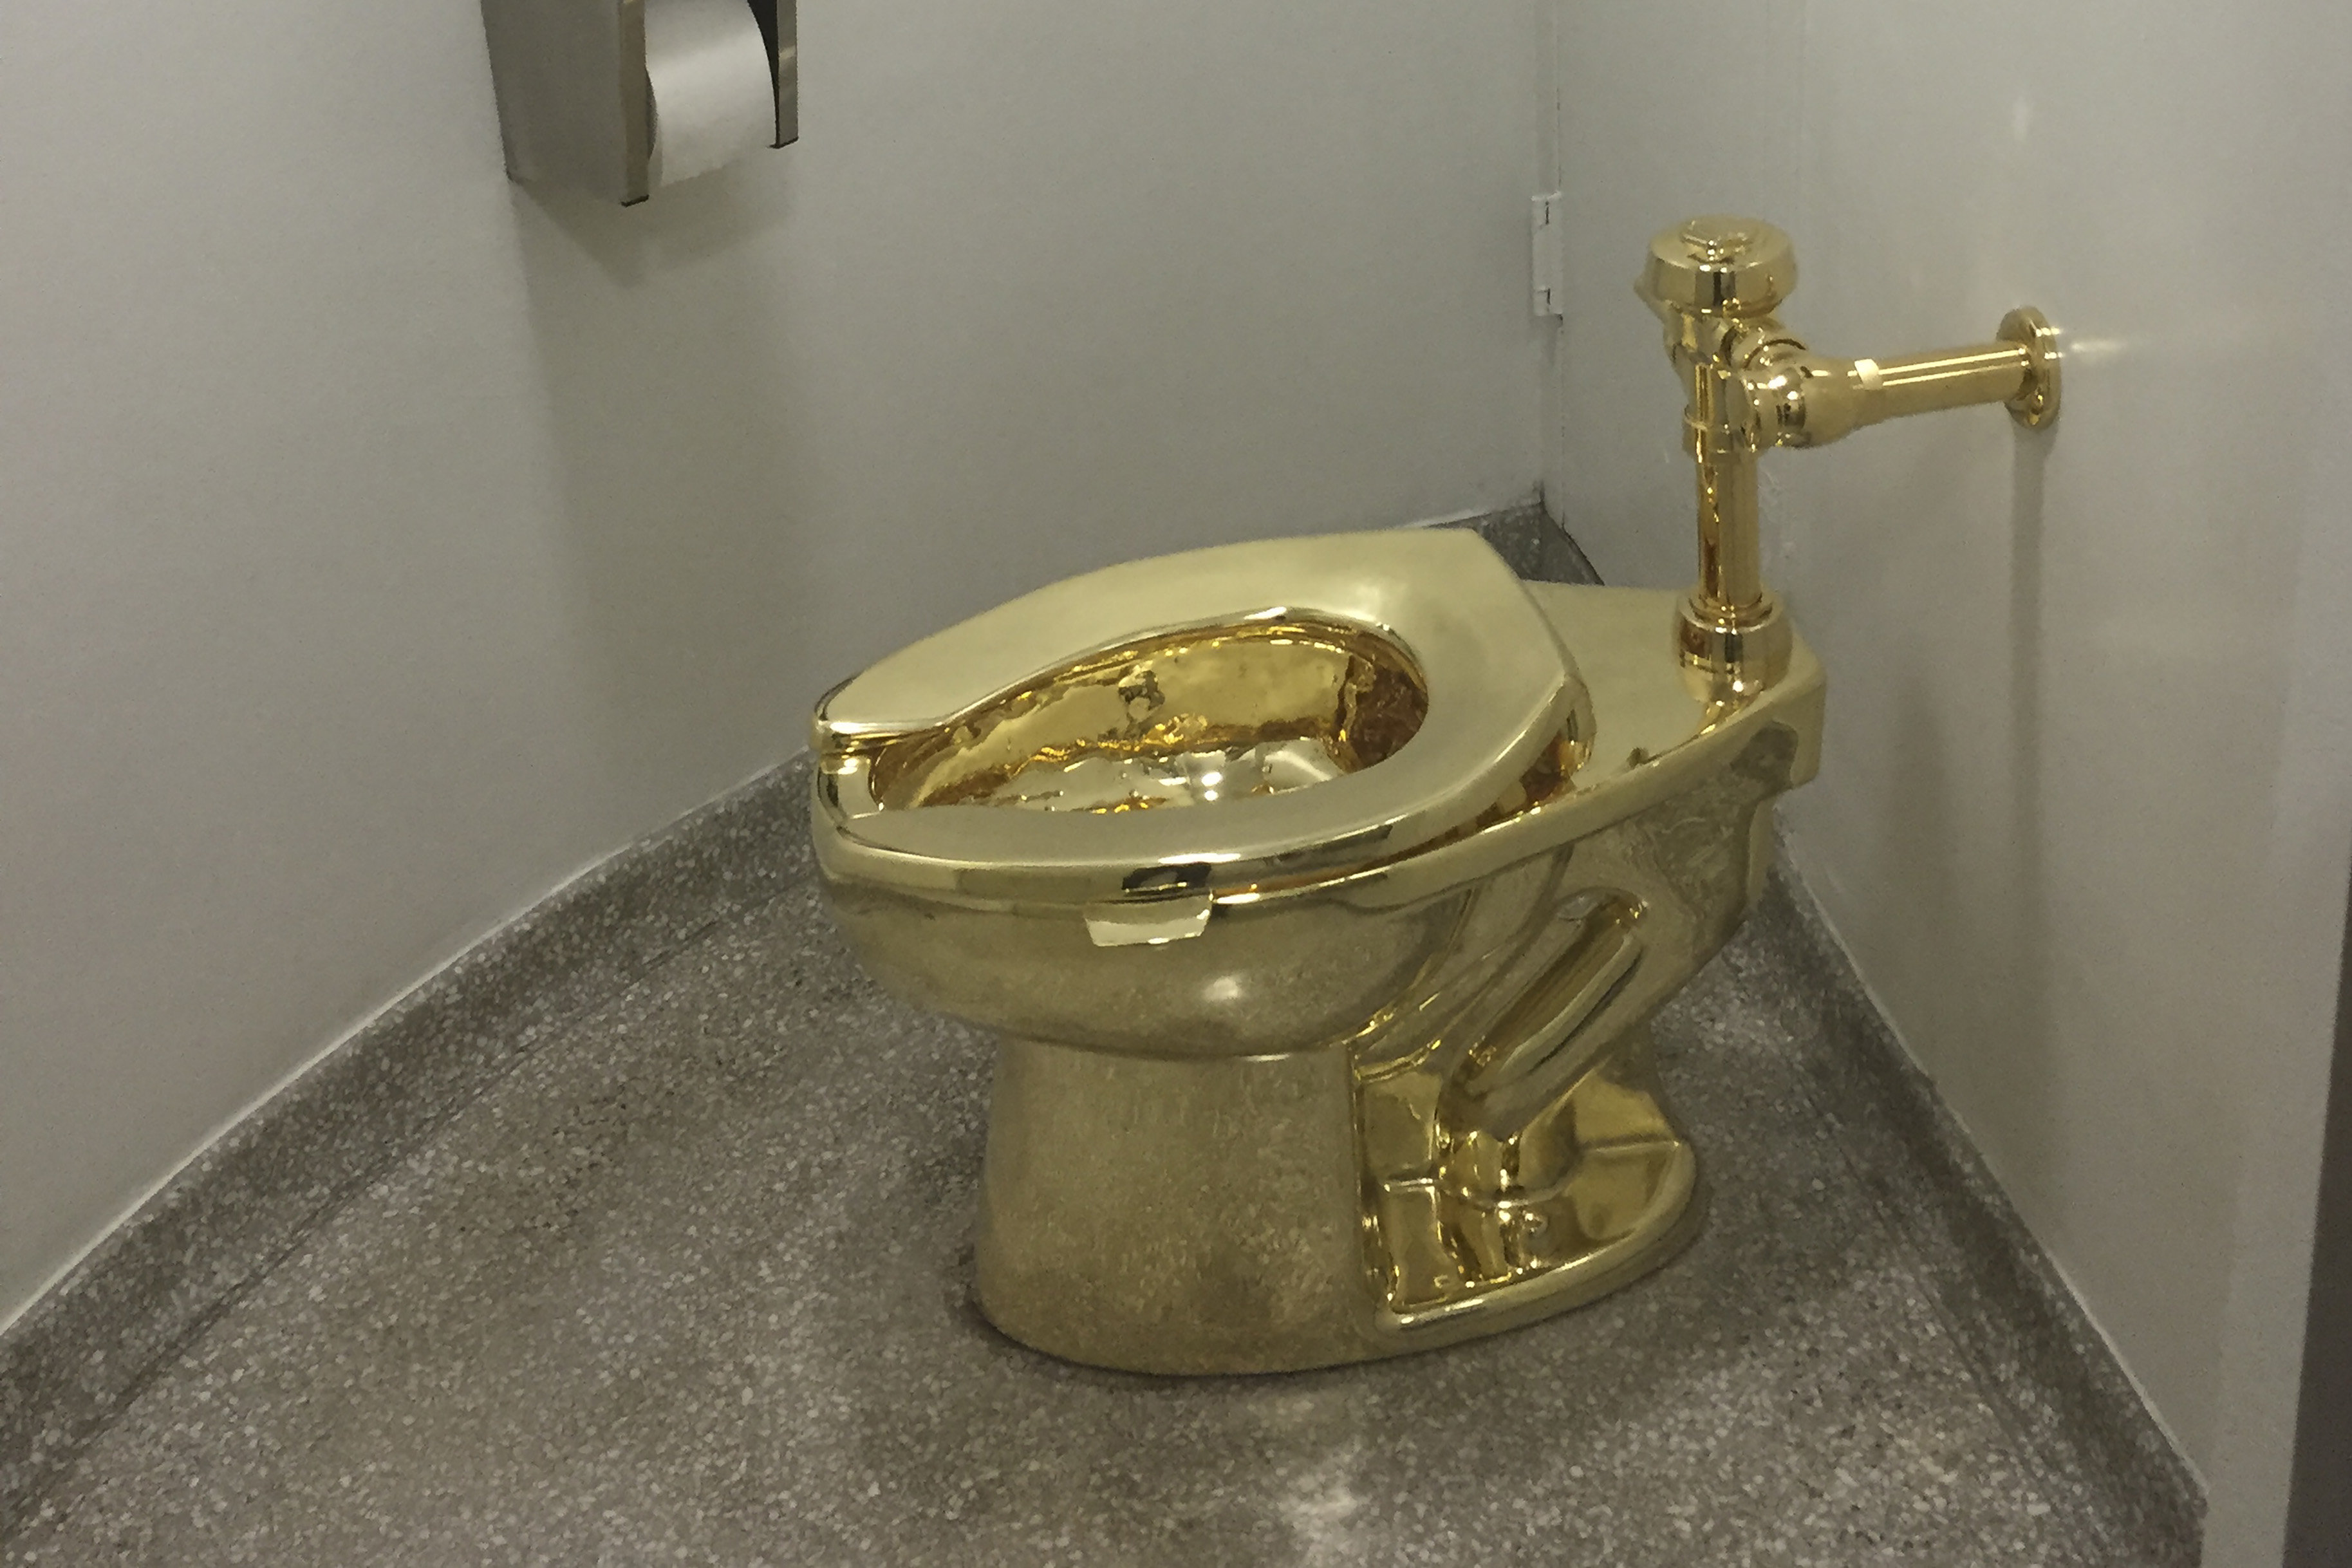 <strong>Donald Trump has been offered this 18-karat gold toilet by New York's Guggenheim Museum&nbsp;</strong>